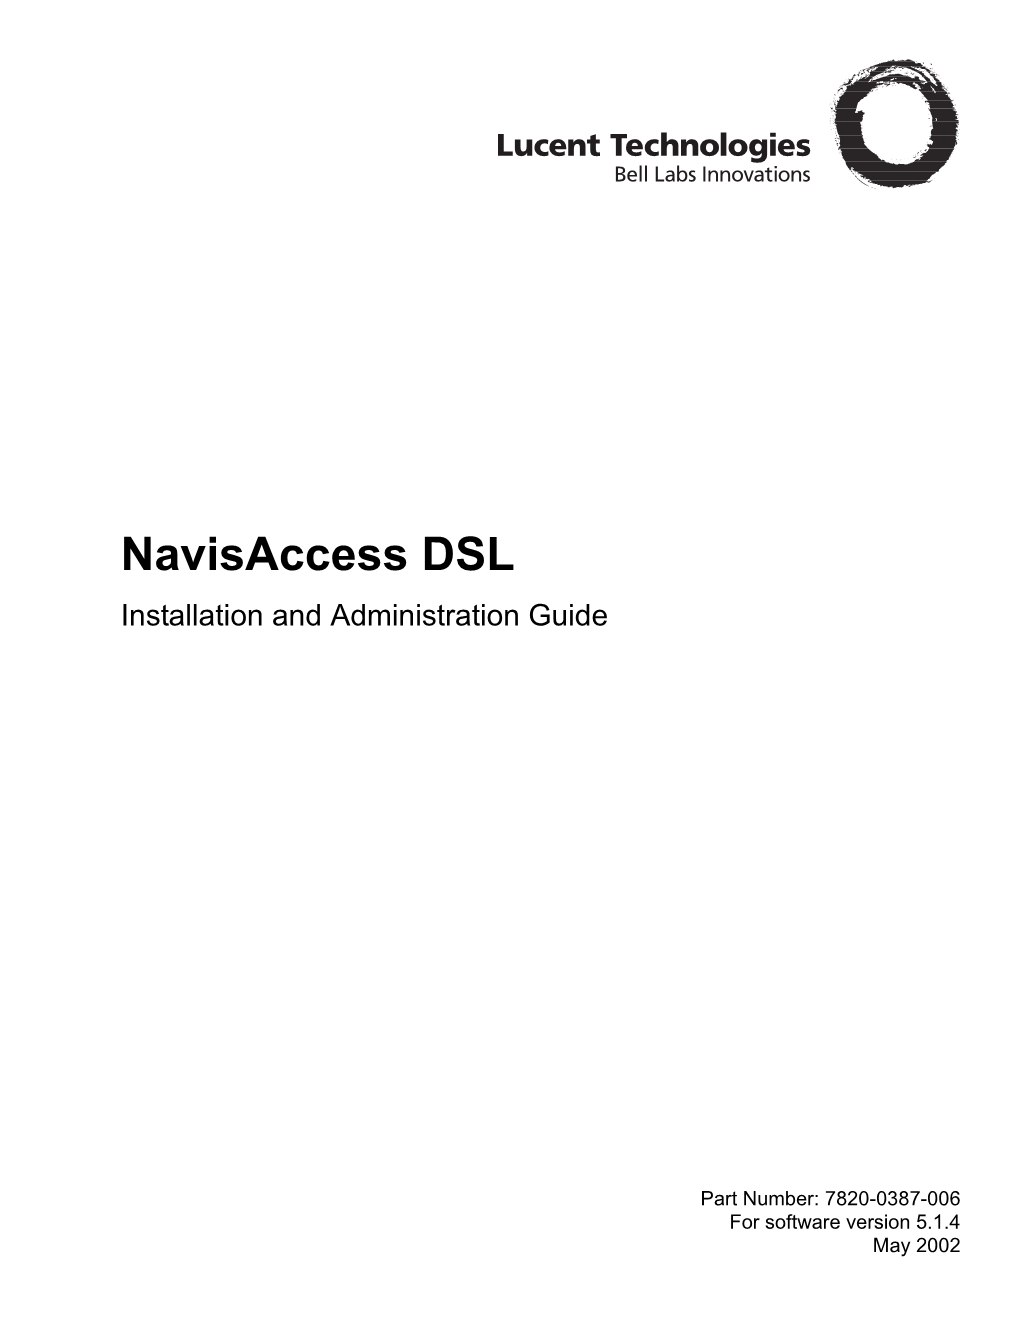 Installation and Administration Guide Version 5.1.4